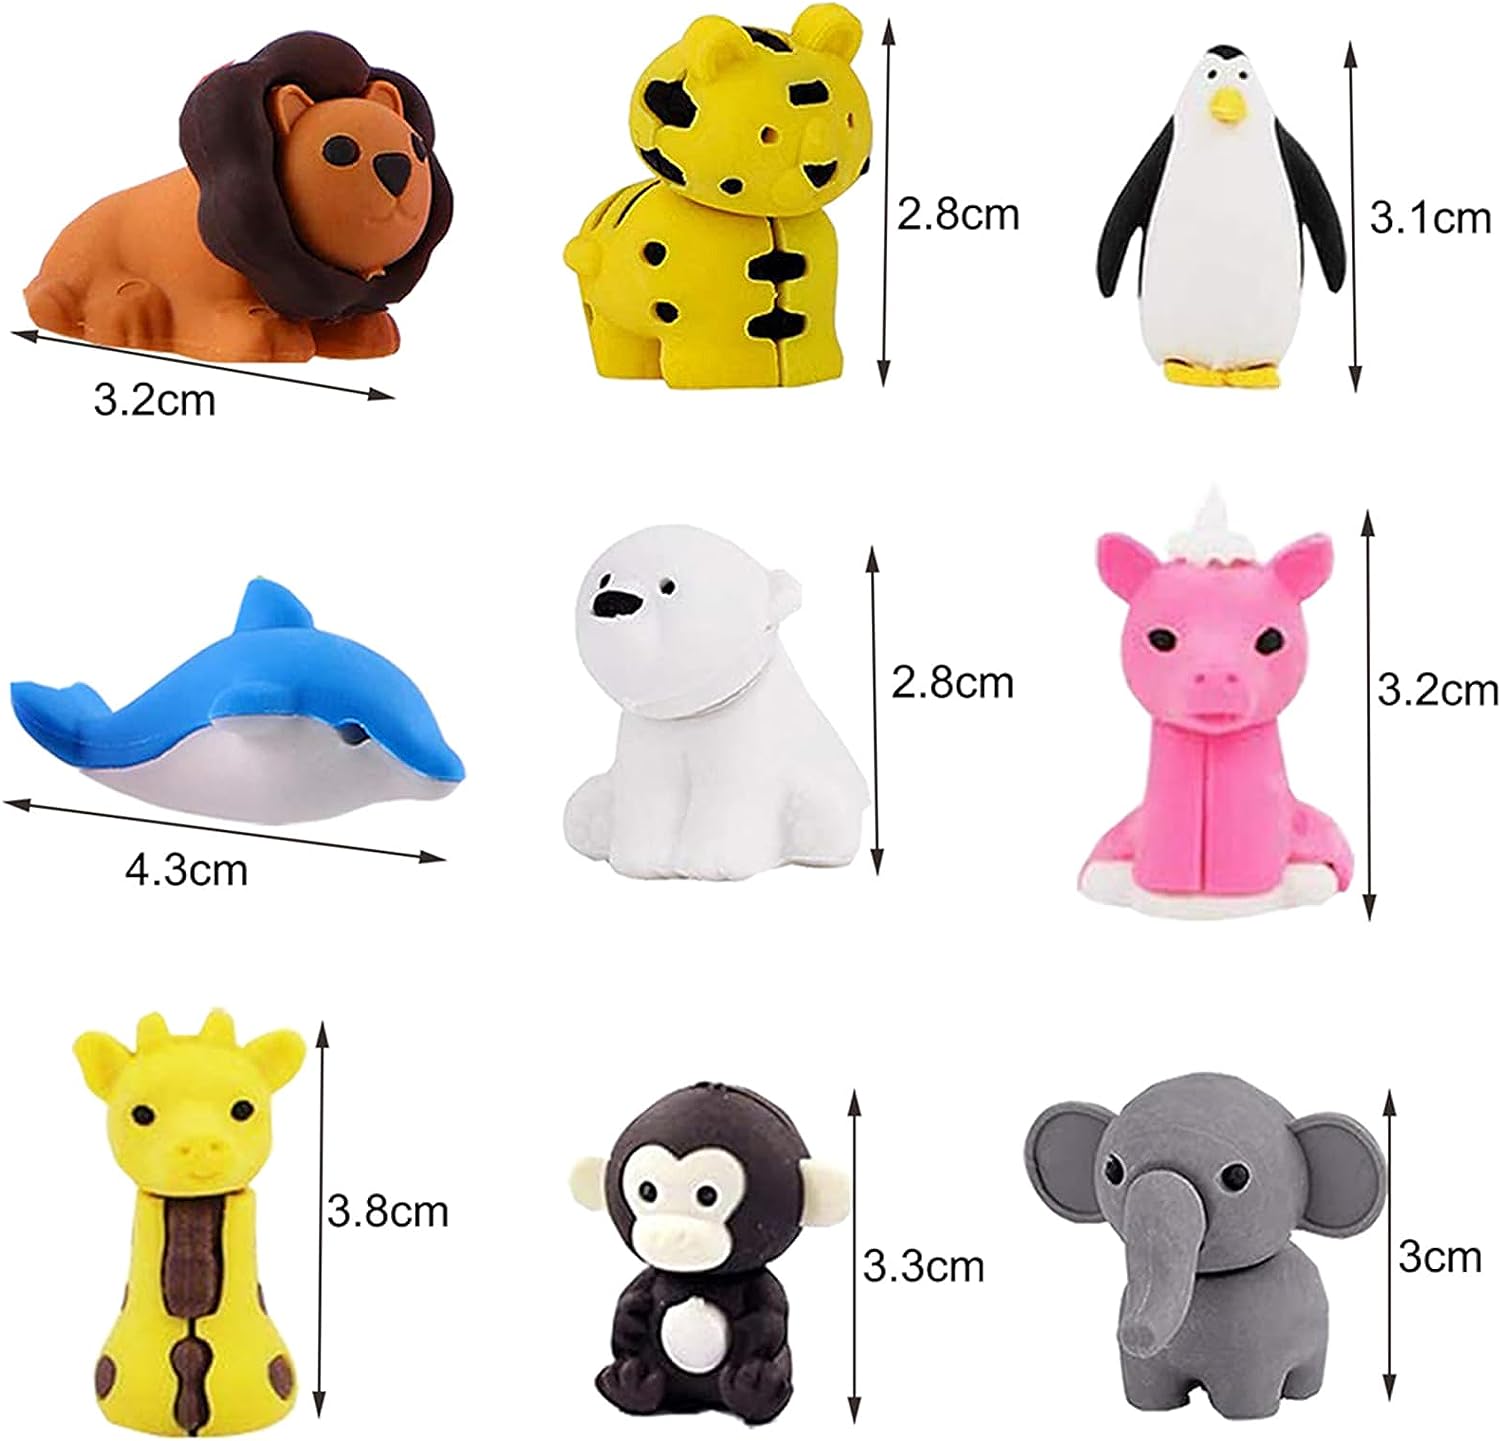 URSKYTOUS 60Pcs Animal Erasers Desk Pets for Kids Animal Pencil Erasers Bulk Puzzle Erasers Toys Gifts for Classroom Prizes,Game Reward,Treasure Box,Easter Egg Fillers,Goodie Bag Stuffers,Party Favors